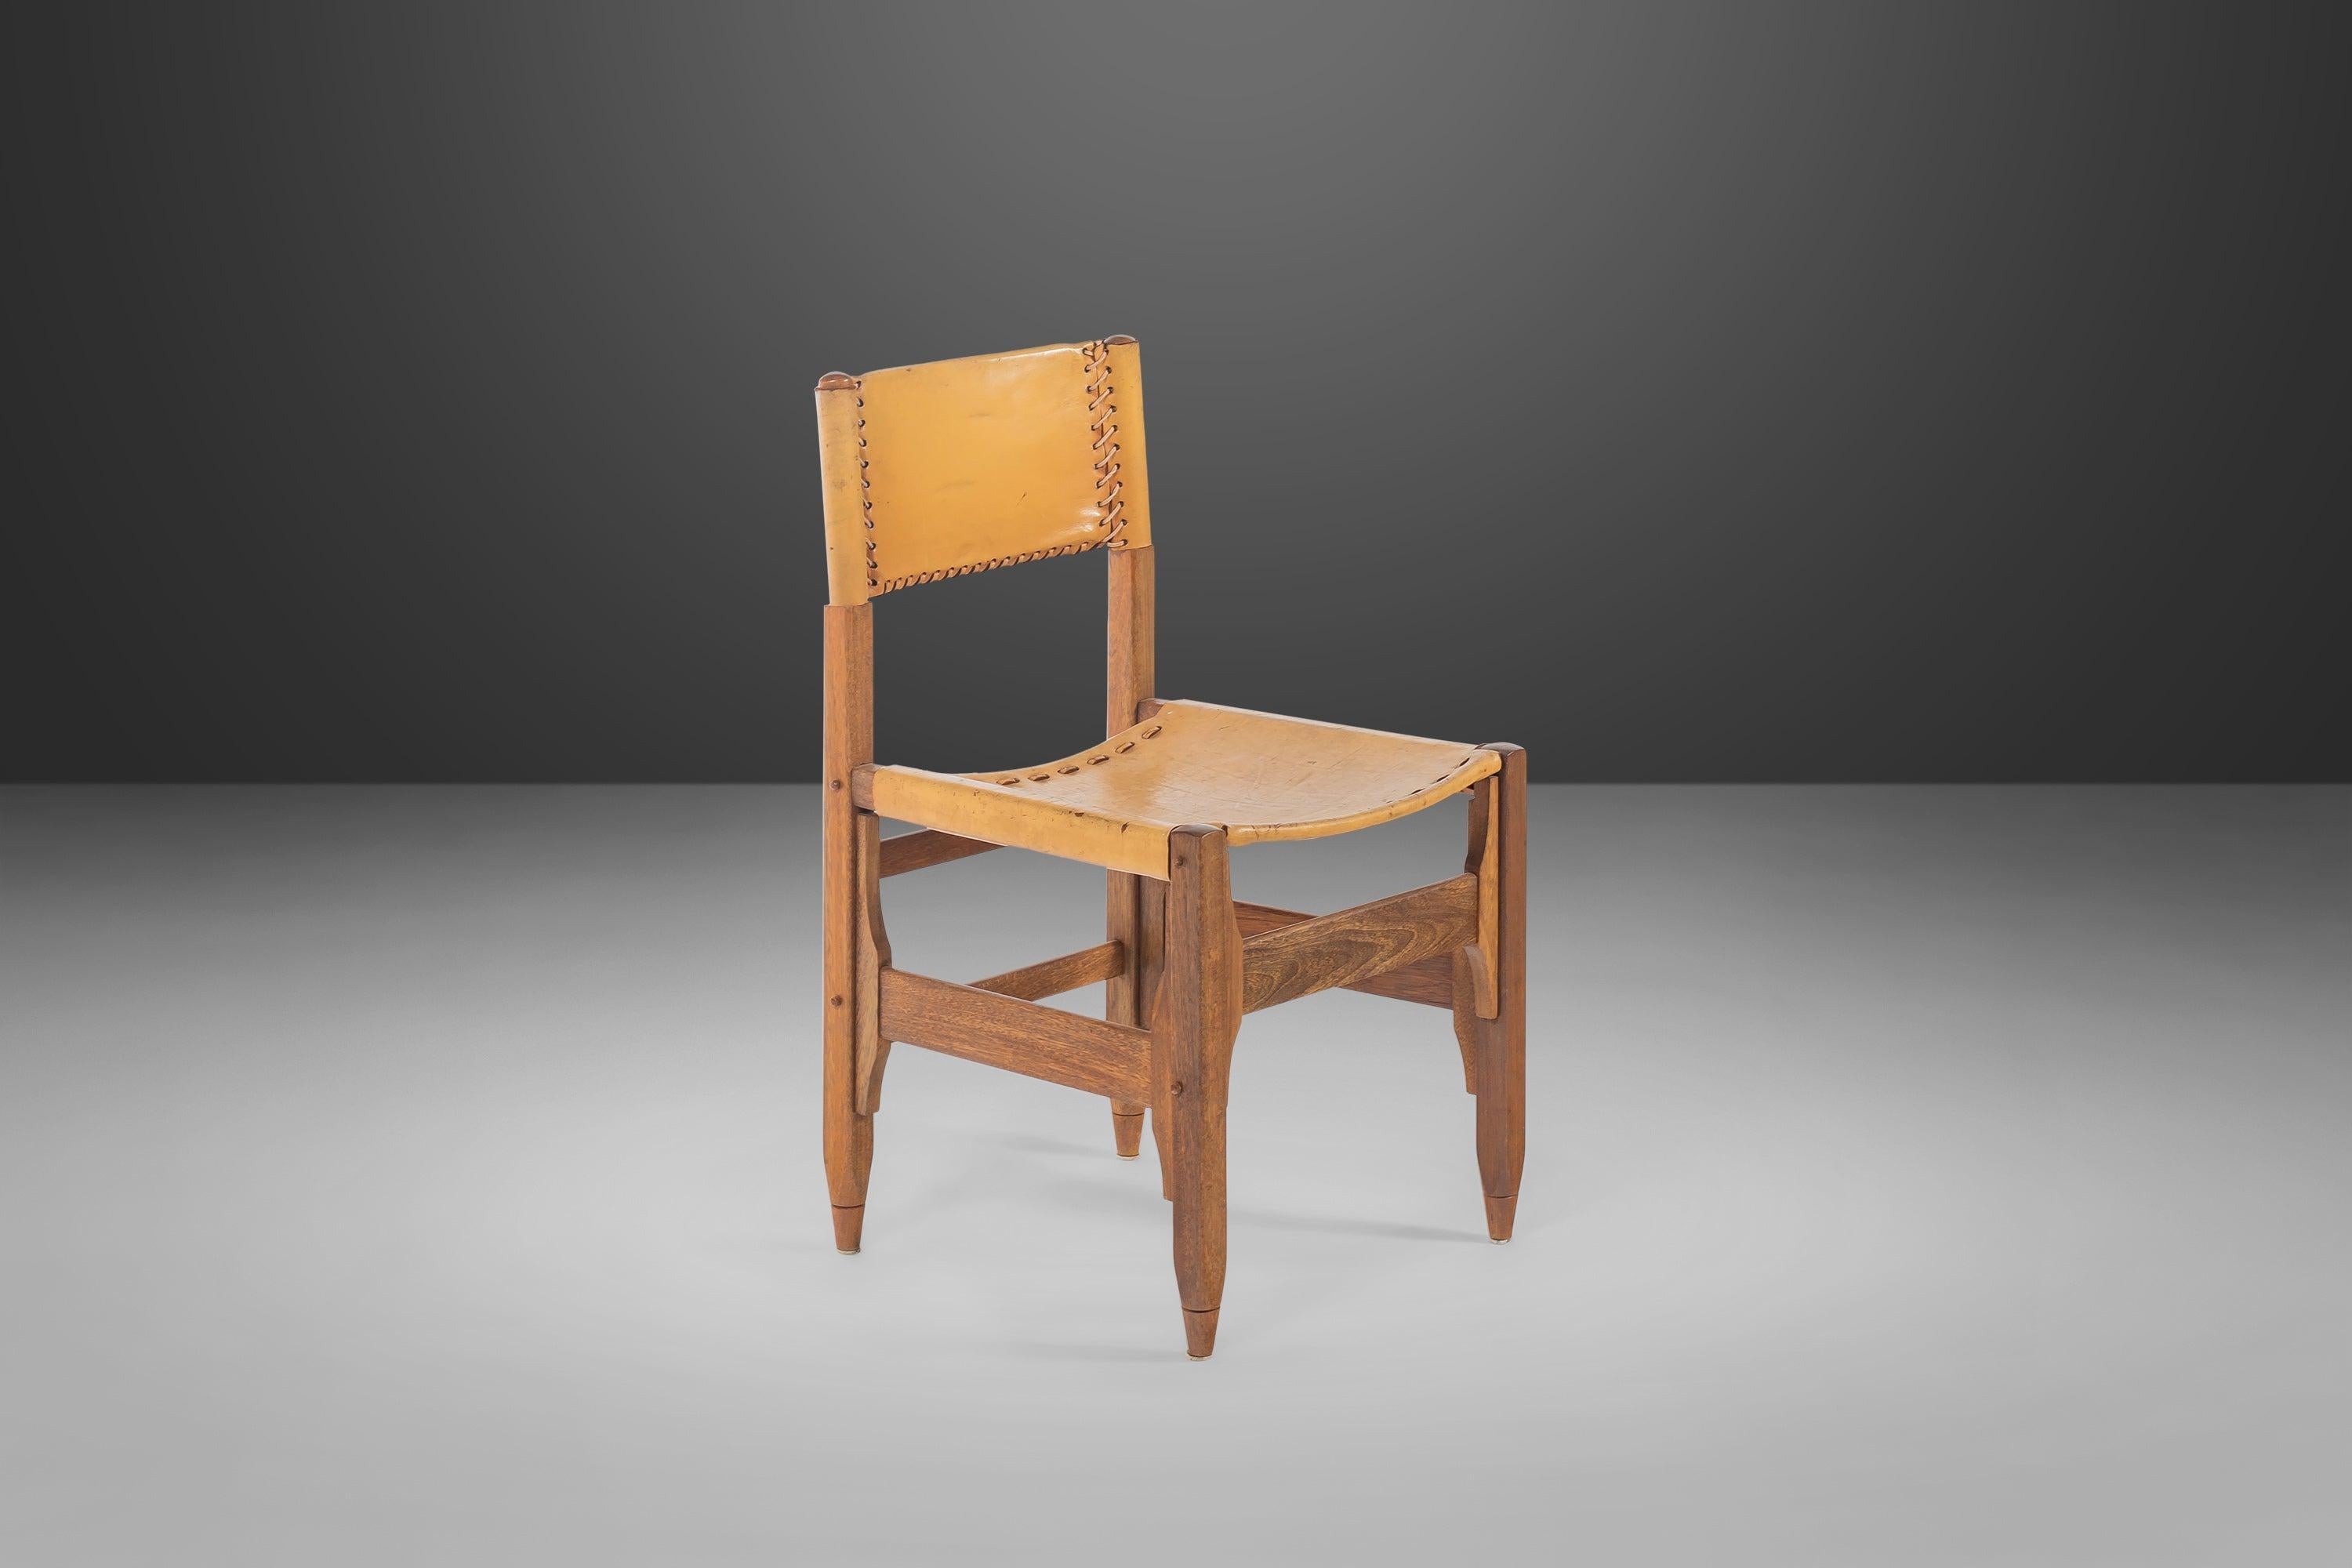 European Tanned Saddle Leather Side Chair Designed by Biermann Werner for Arte Sano, 1960 For Sale